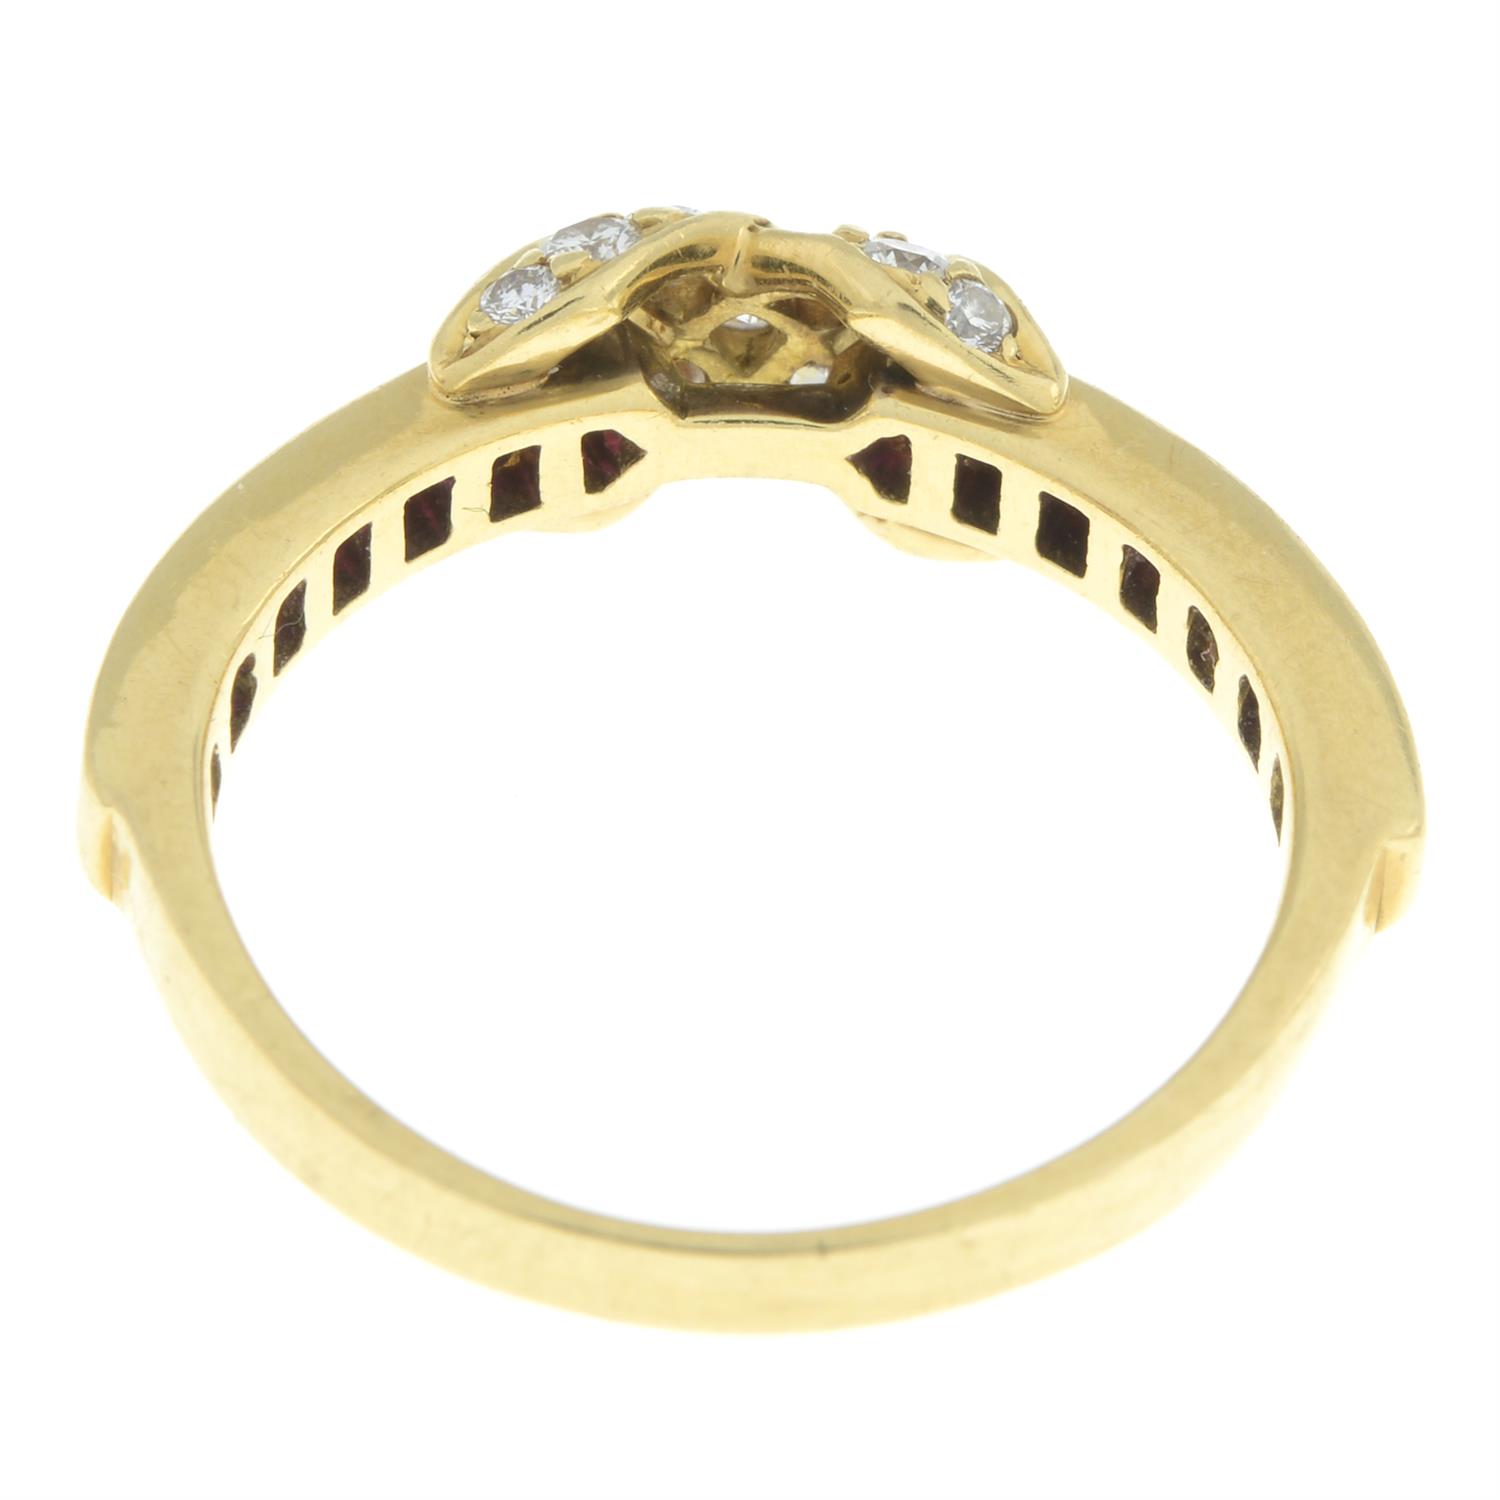 18ct gold diamond and ruby ring, by Tiffany & Co. - Image 3 of 5